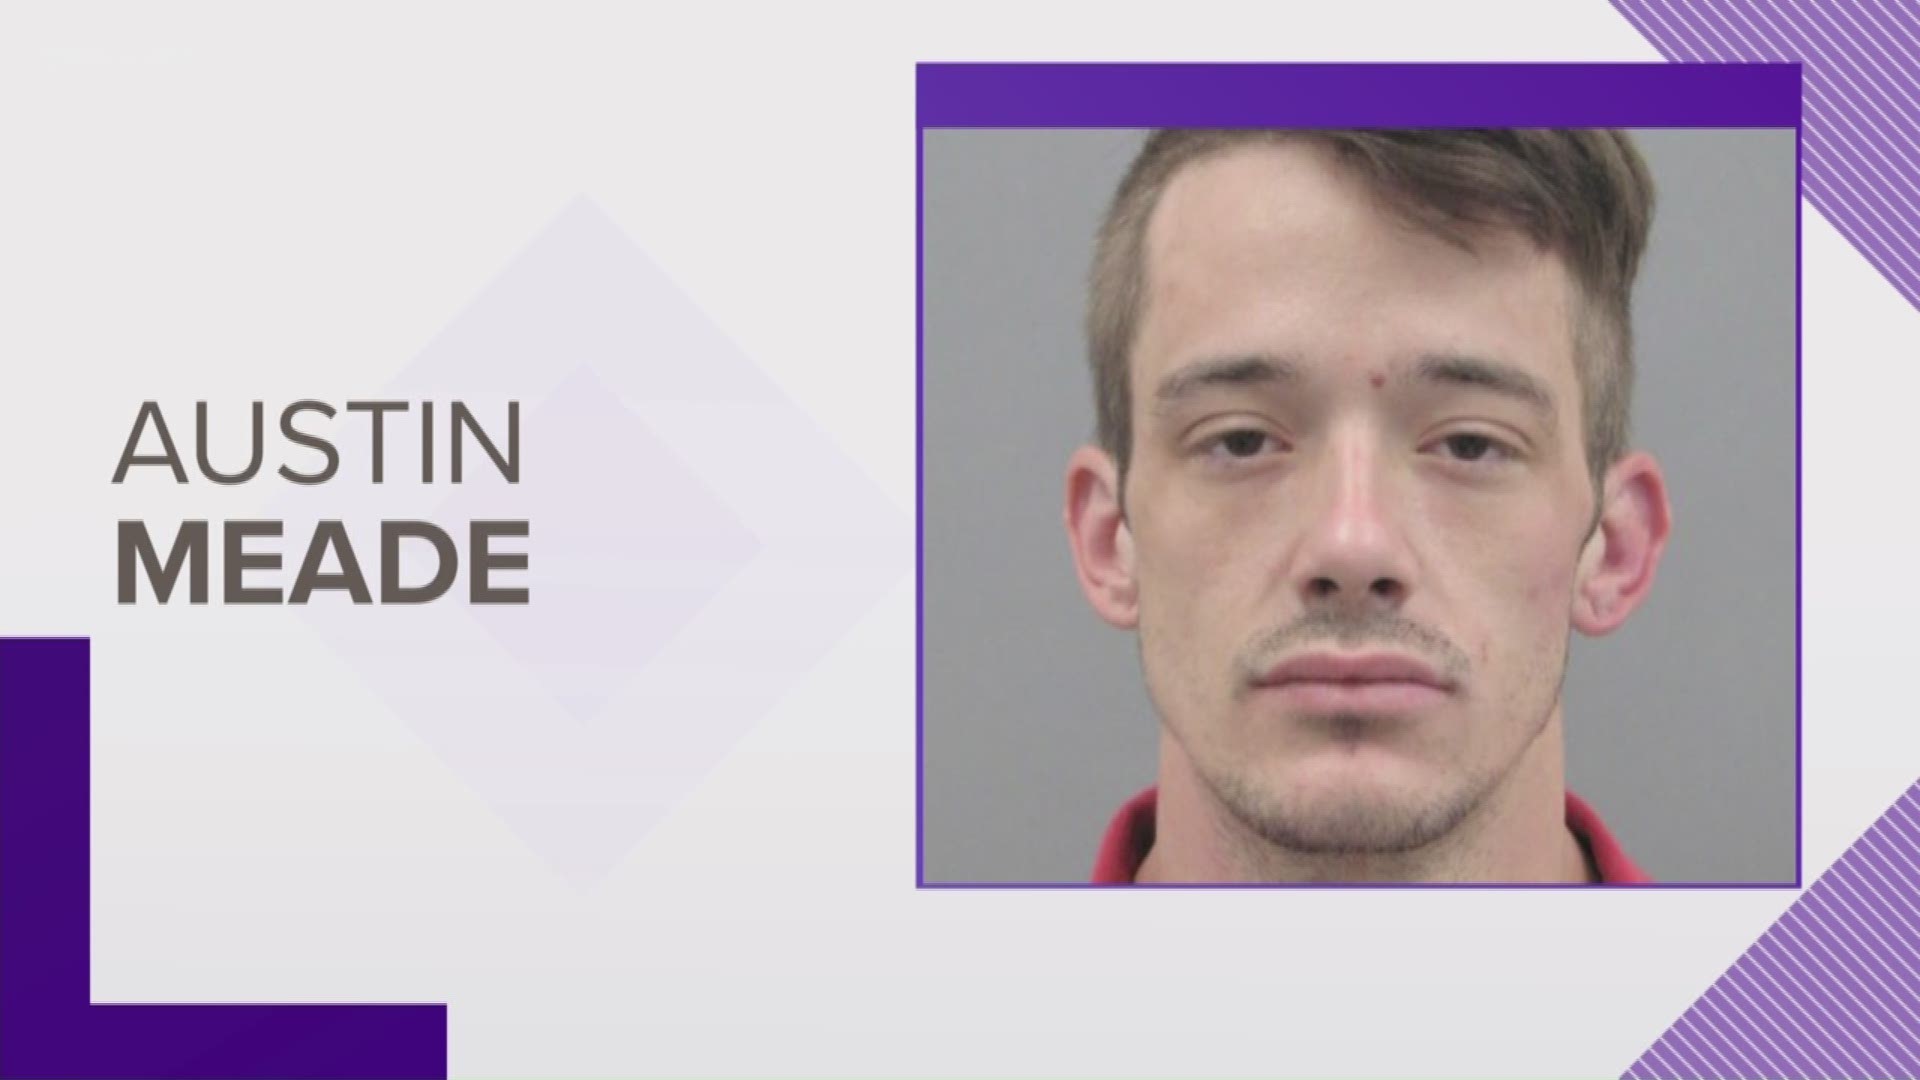 Police are seeking a suspect believed to be armed and dangerous after being accused of killing a woman in a crash and threatening another with a knife in New Braunfels.